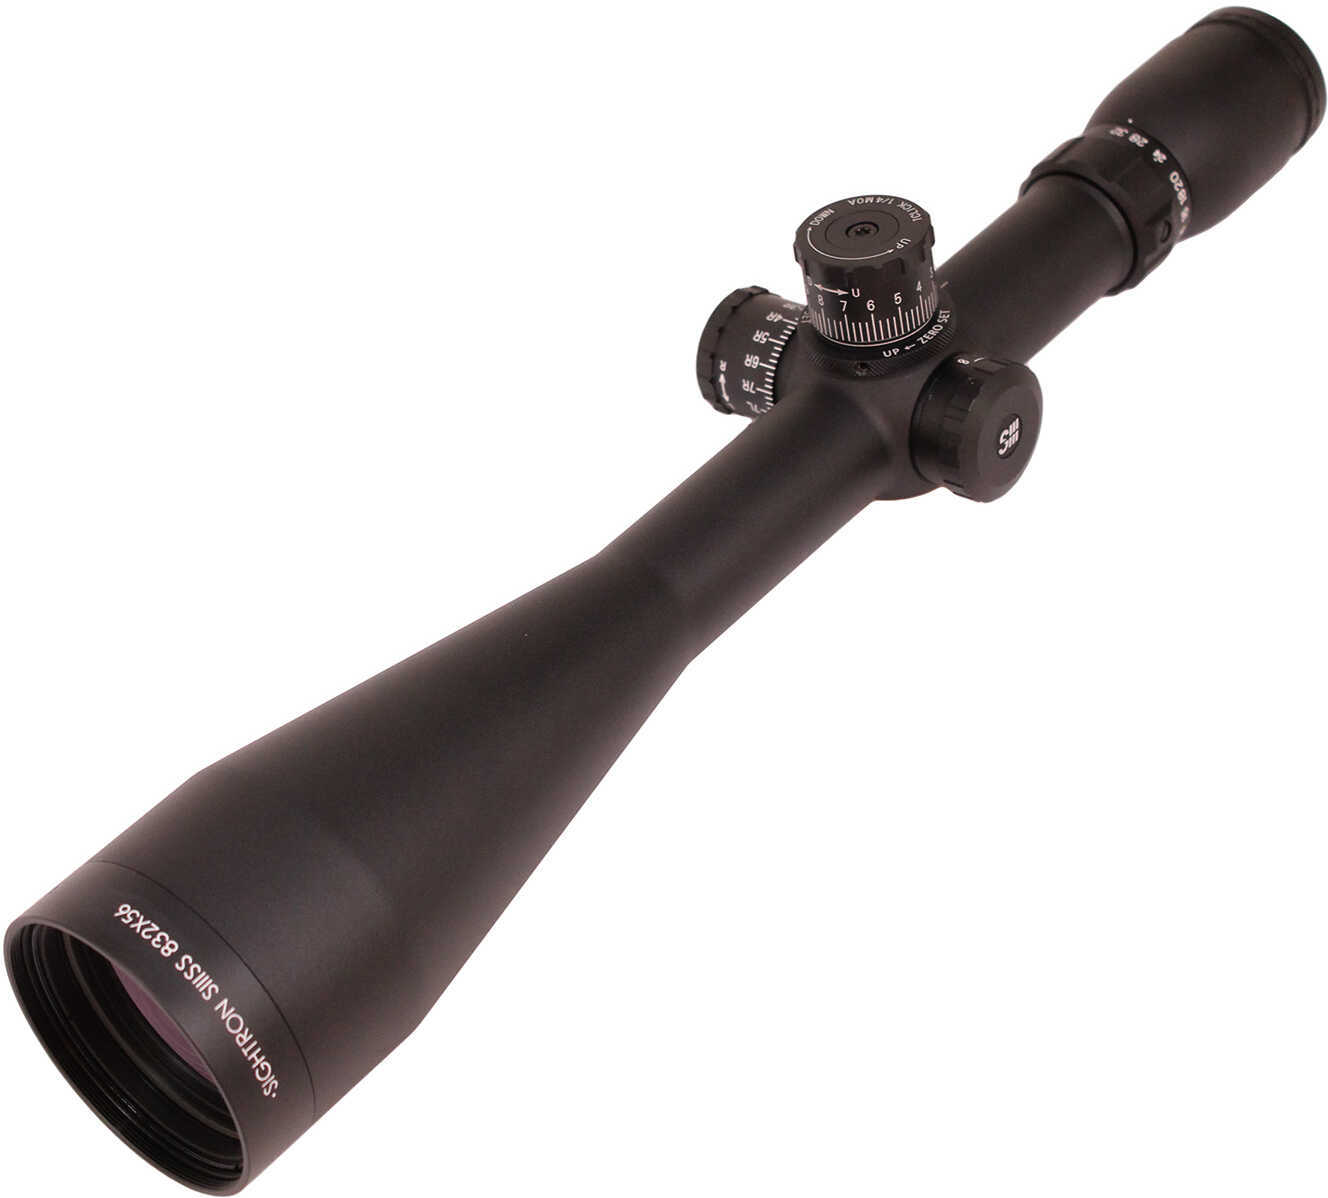 Sightron SIII Long Range Zero Stop Riflescope 8-32x56mm 30mm Tube MOA Type Reticle Side Focus 1/4 Tactical Knobs Ma